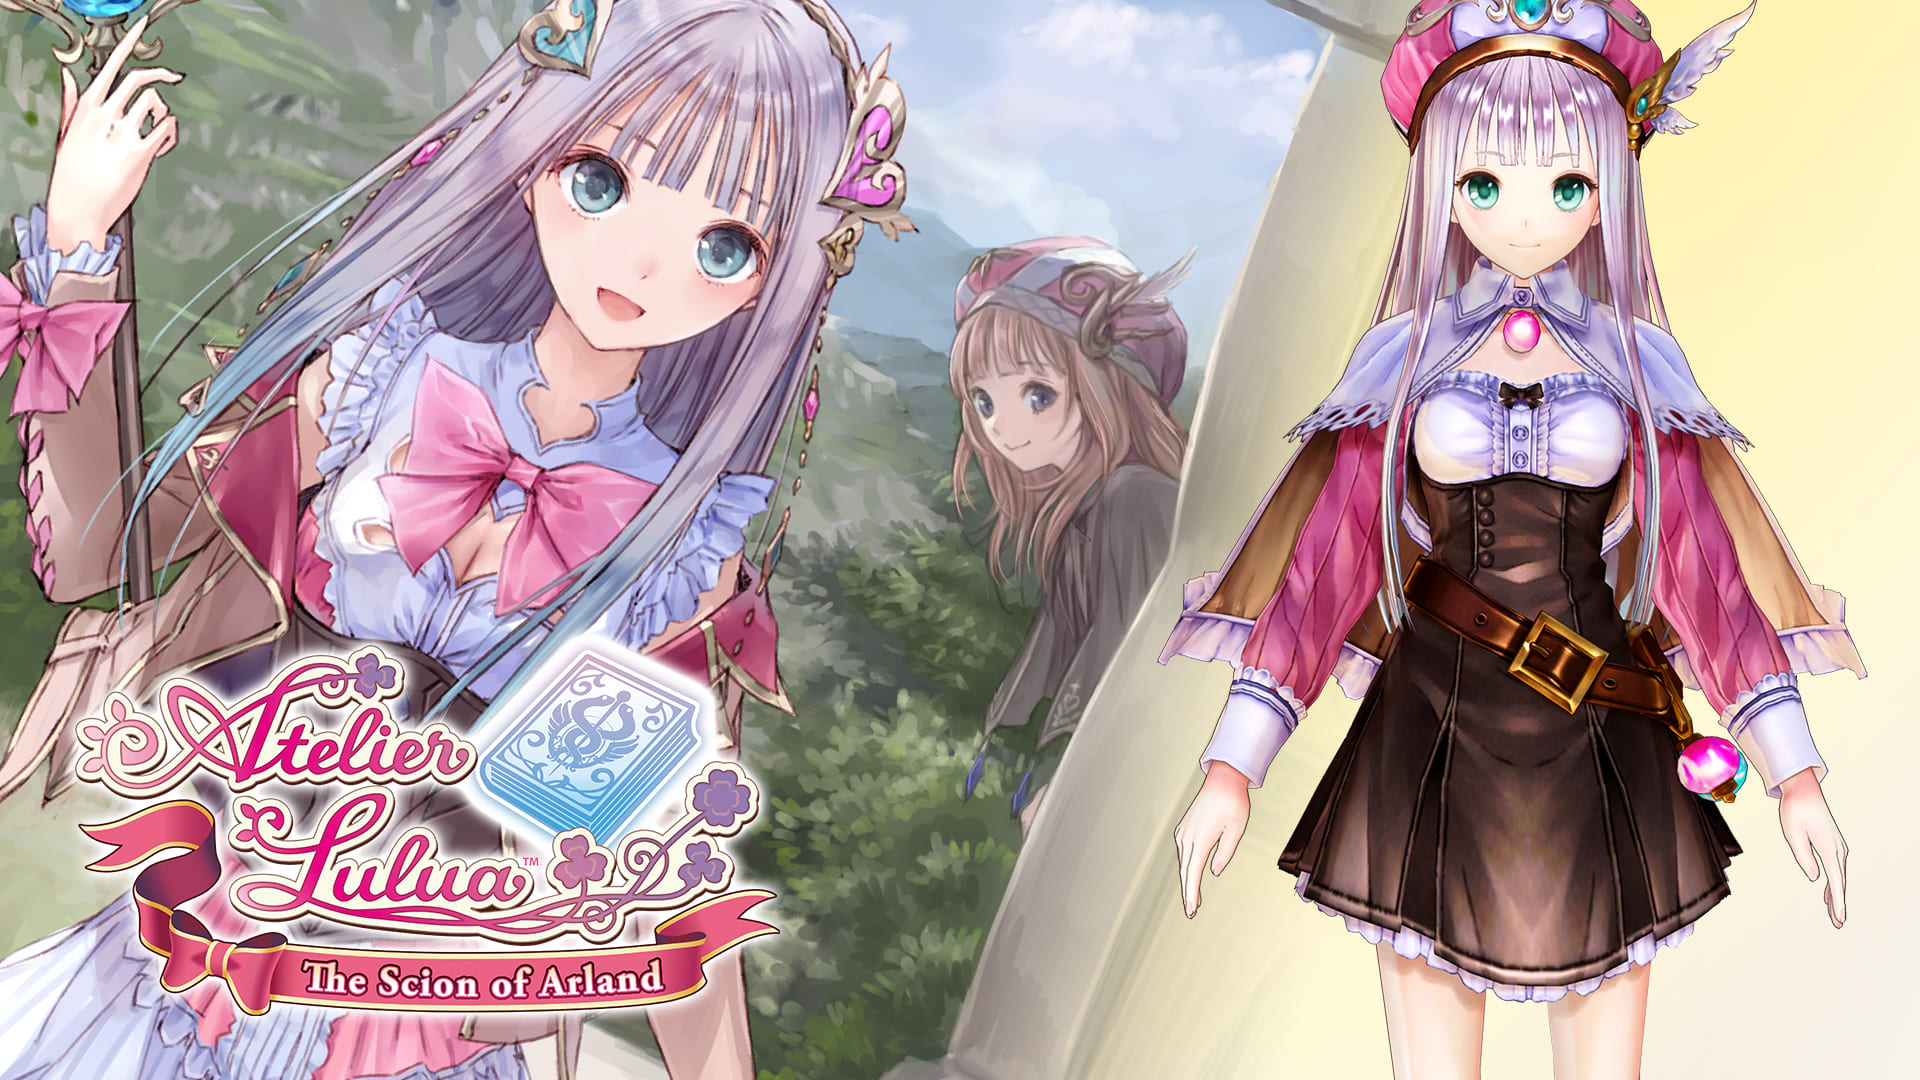  Lulua's Outfit "Mom's Favorite"